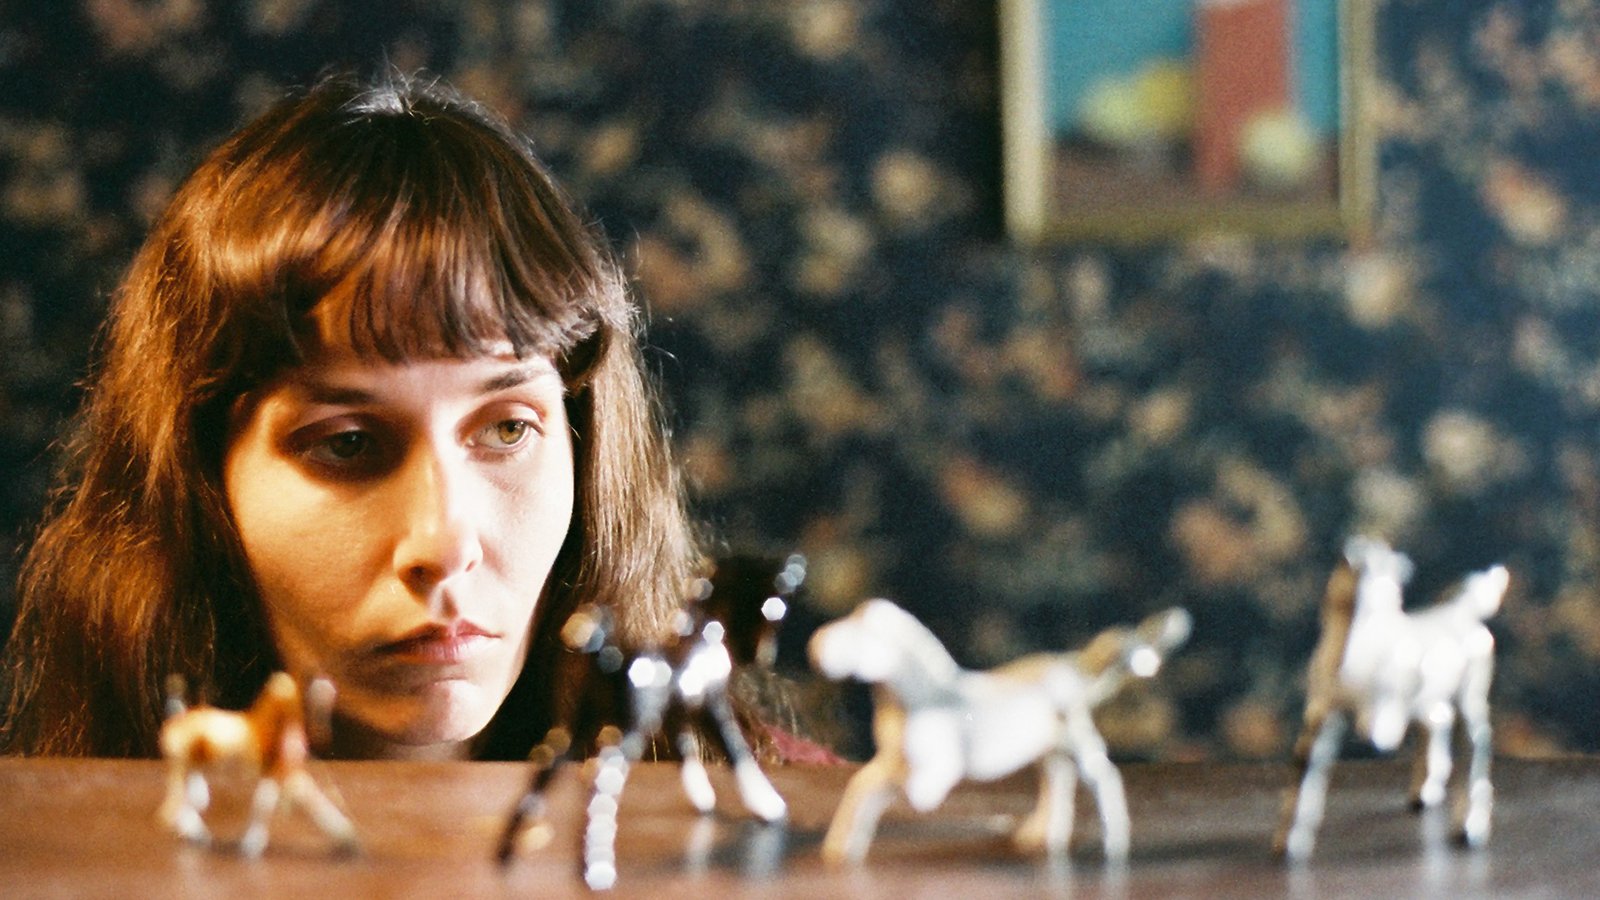 A sullen woman looks at four plastic toy horses on a table